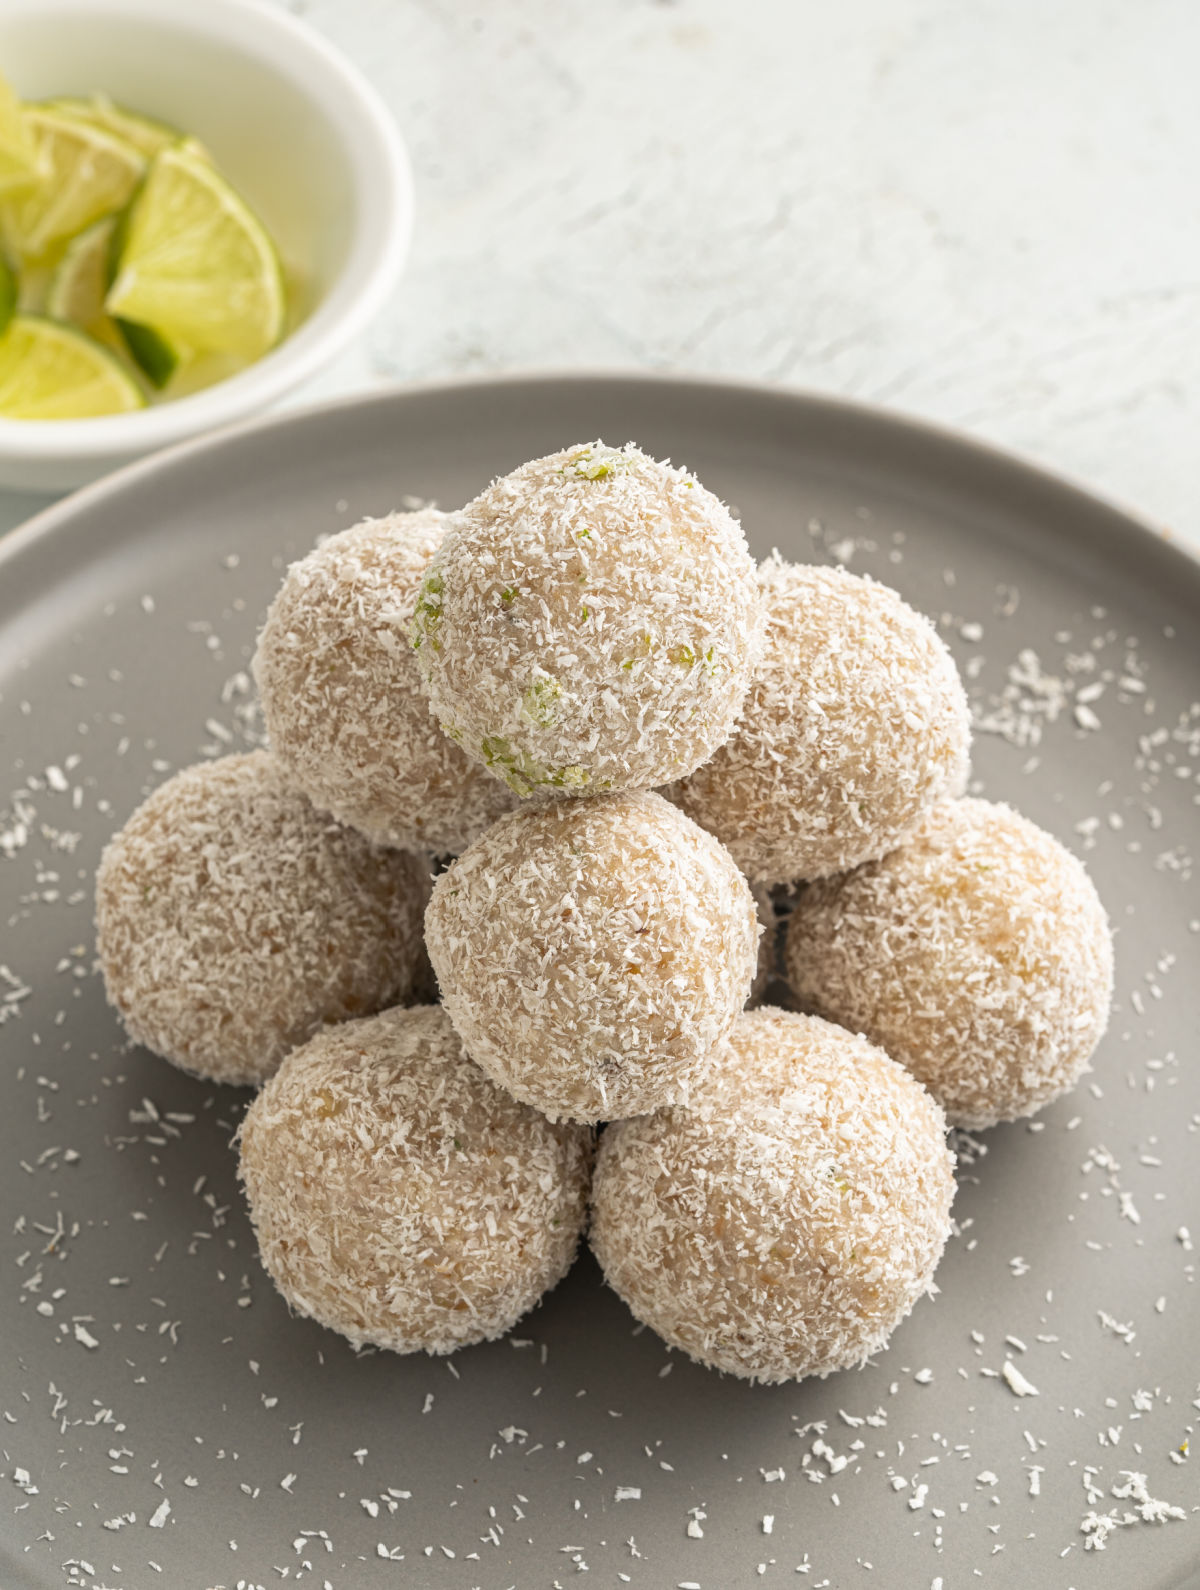 Coconut lime energy balls stacked on a gray plate.